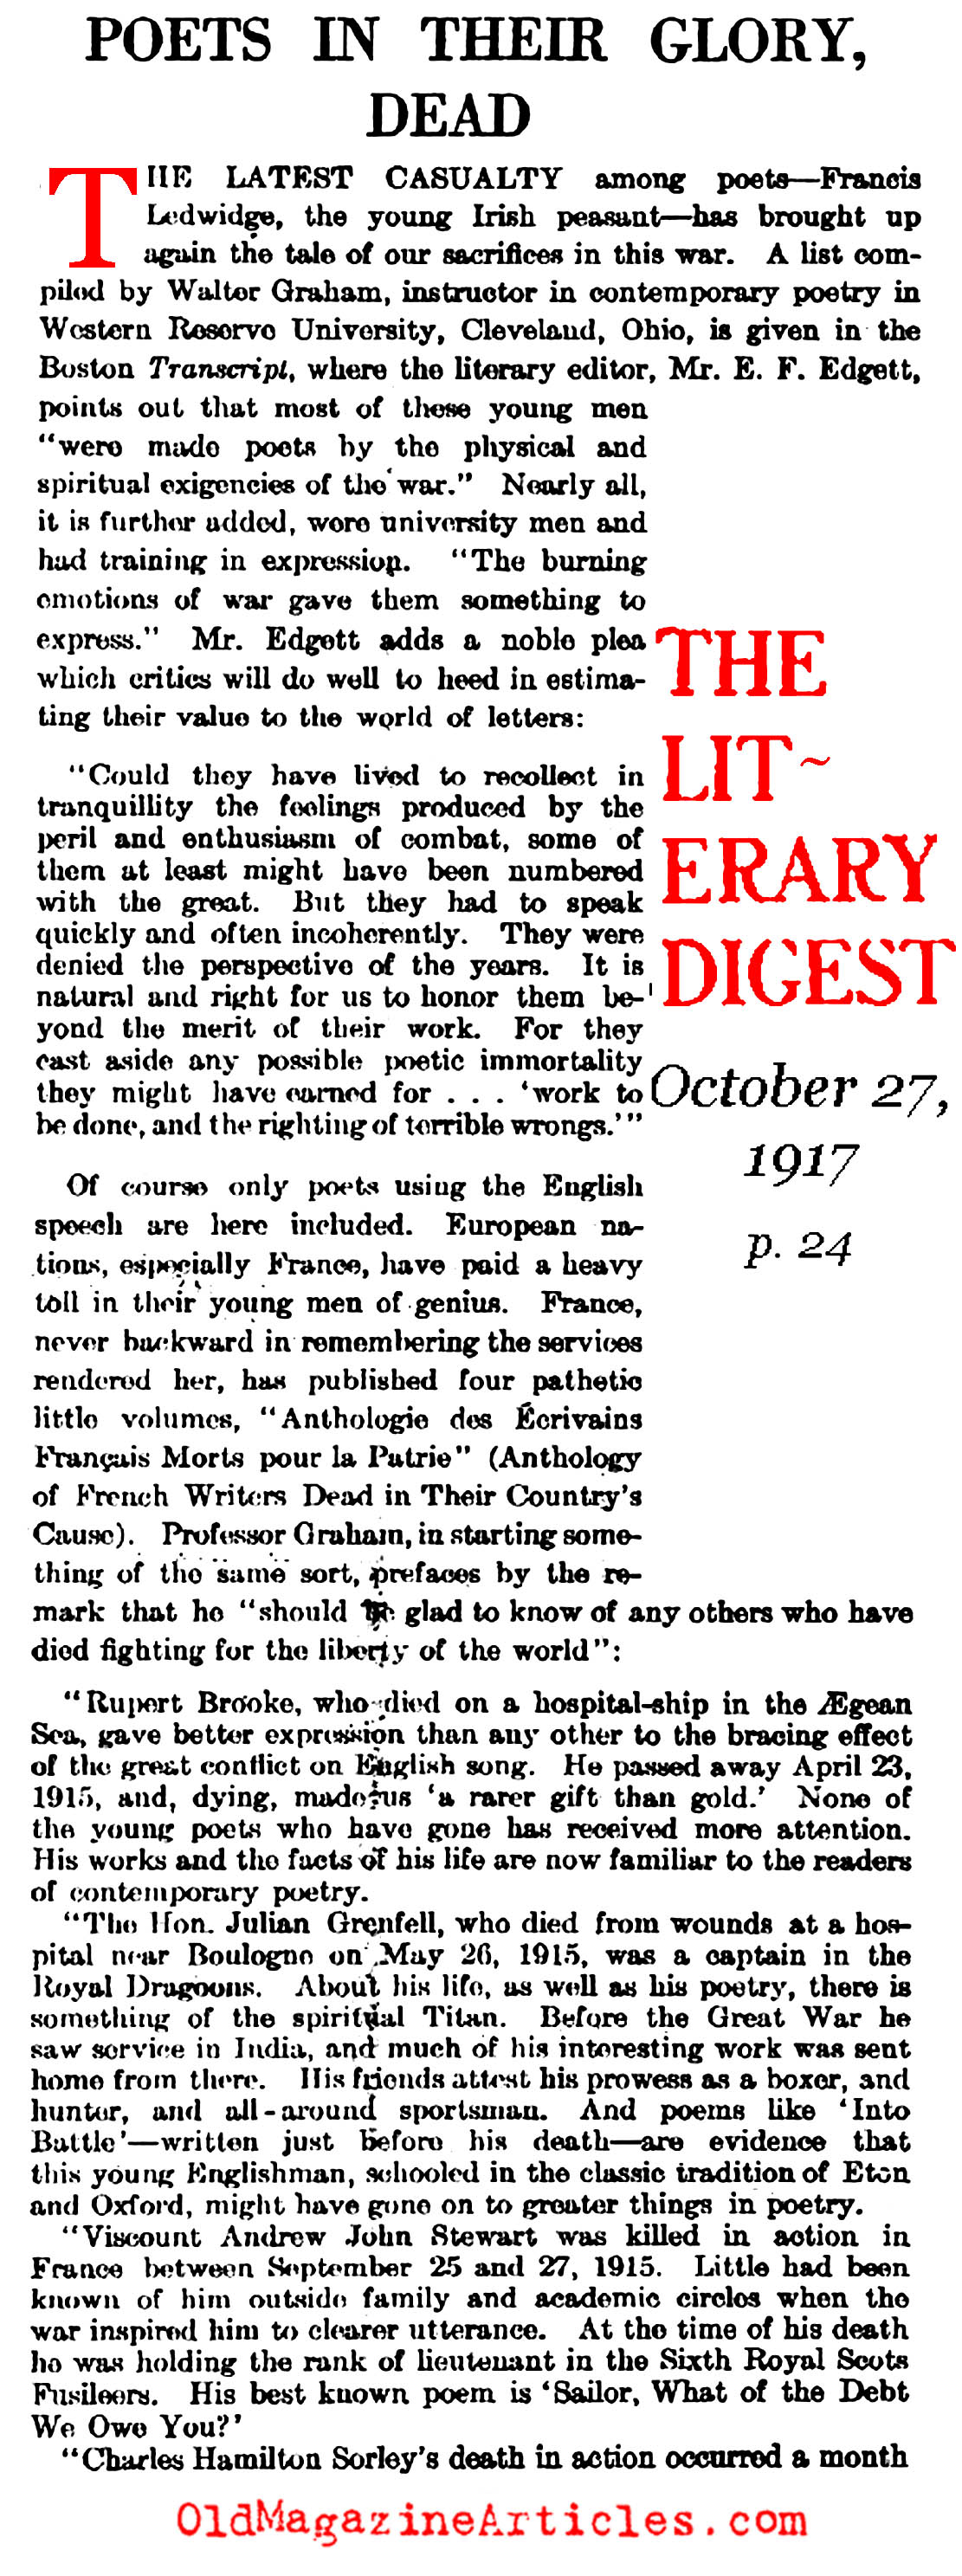 Poets in Their Glory: Dead (Literary Digest, 1917)